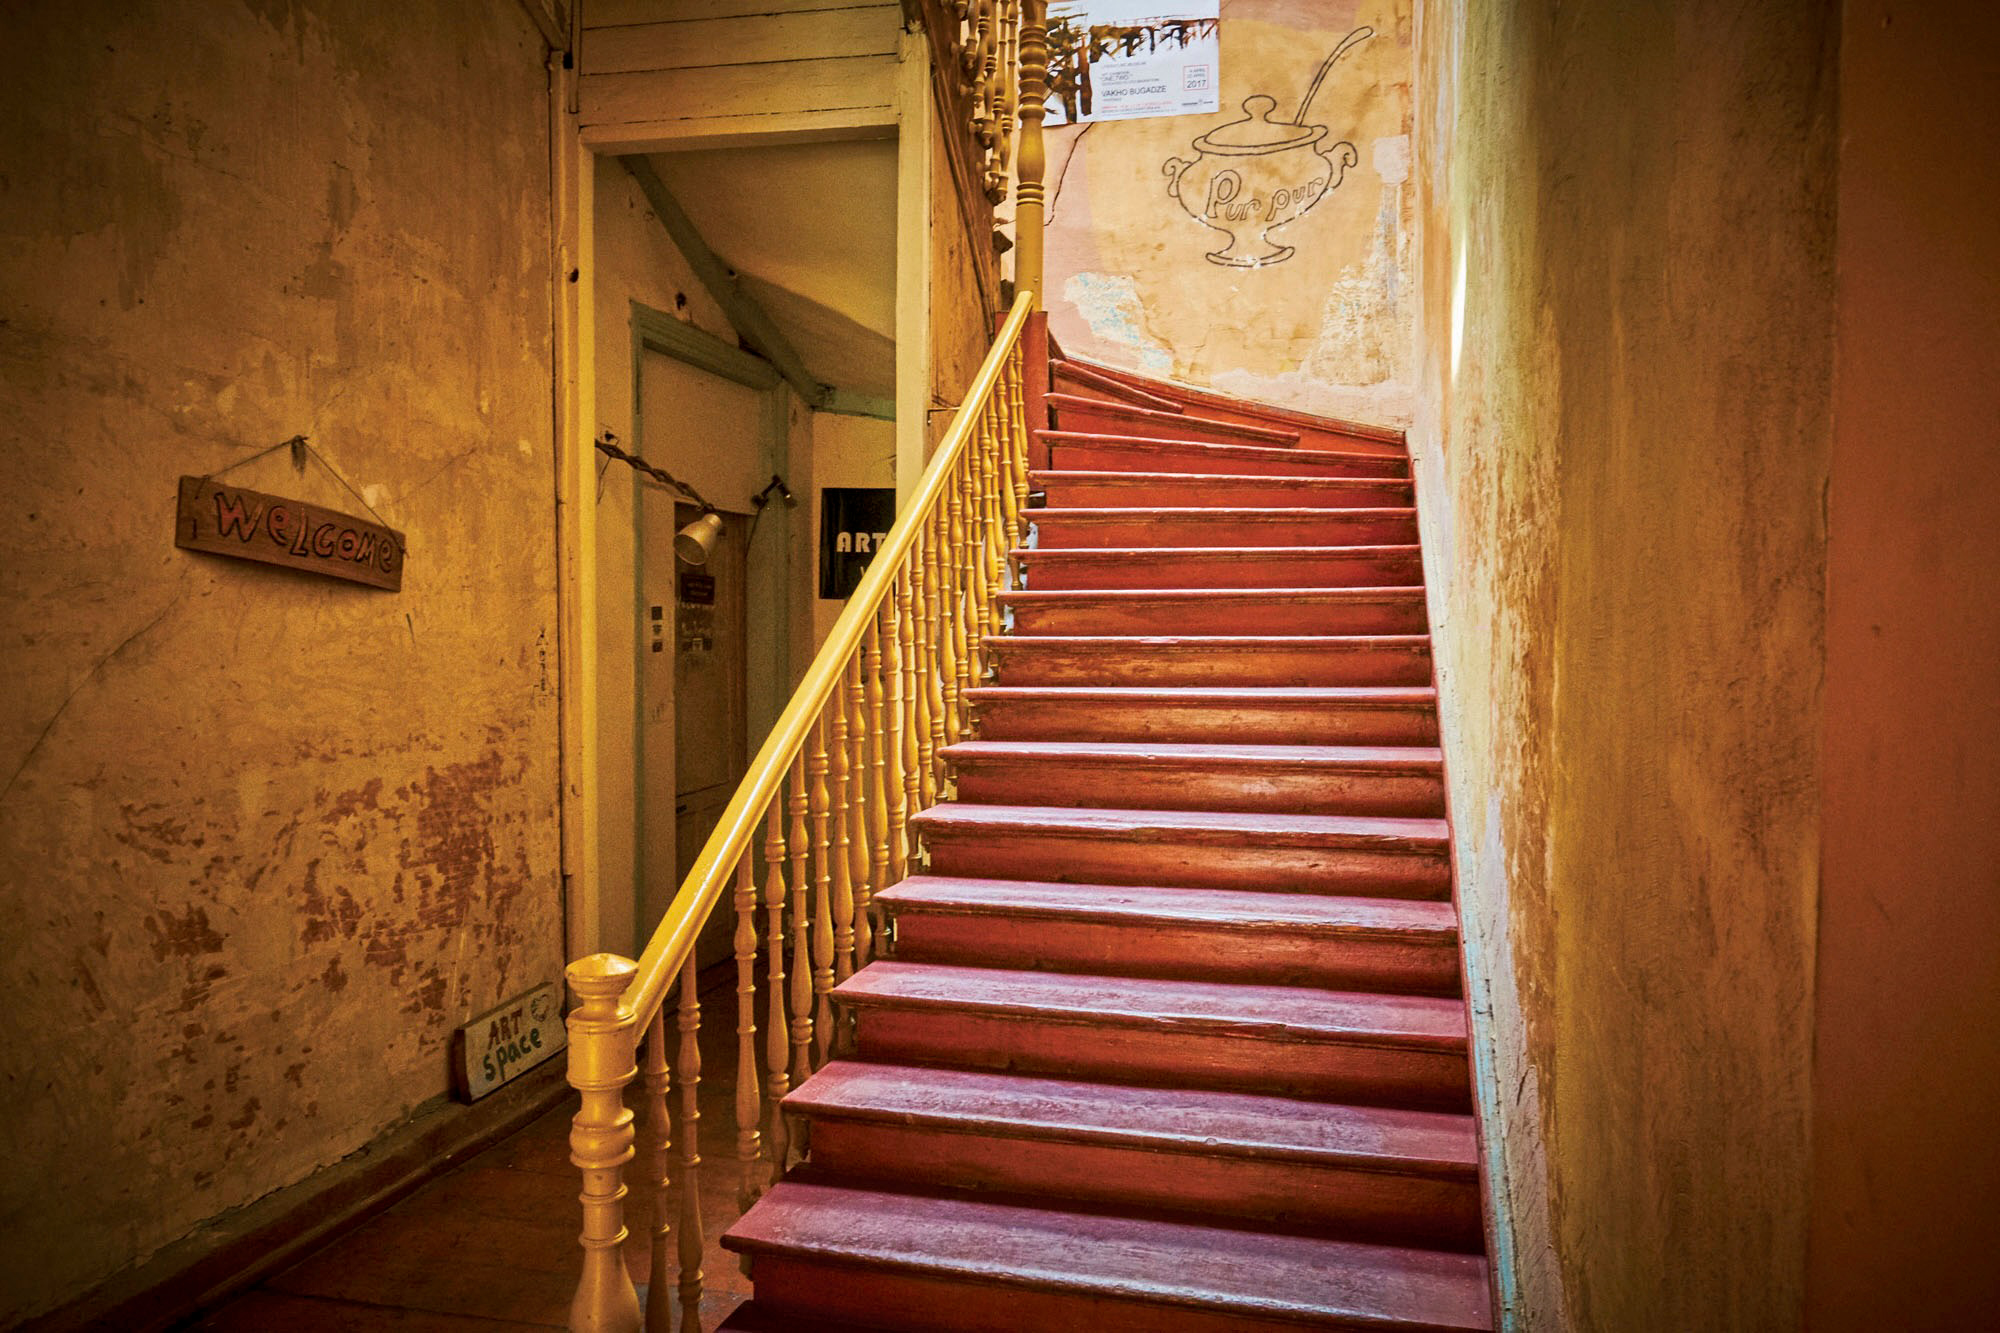 The standard eye-level view of the staircase includes lots of surrounding distractions, whereas the view looking back down from the top of the staircase is contained with fewer distractions and much stronger compositionally.